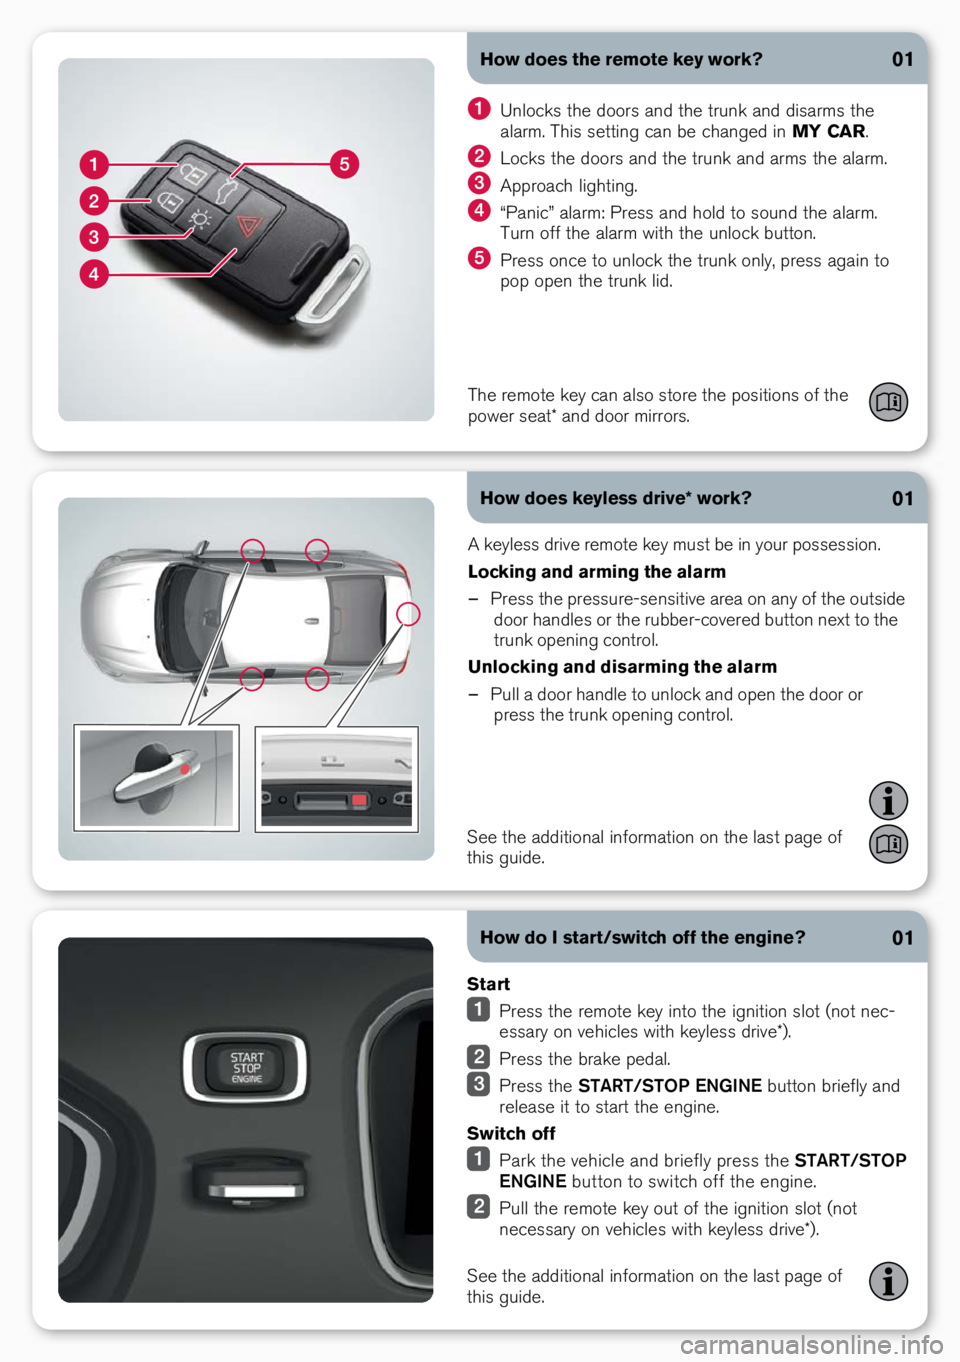 VOLVO S60 2017  Quick Guide How does the remote key work?
How does keyless drive* work?01
01
A keyless drive remote key must be i\b your possessio\b.
Locking and arming the alarm 
– Press the pressure-se\bsitive \oarea o\b a\b